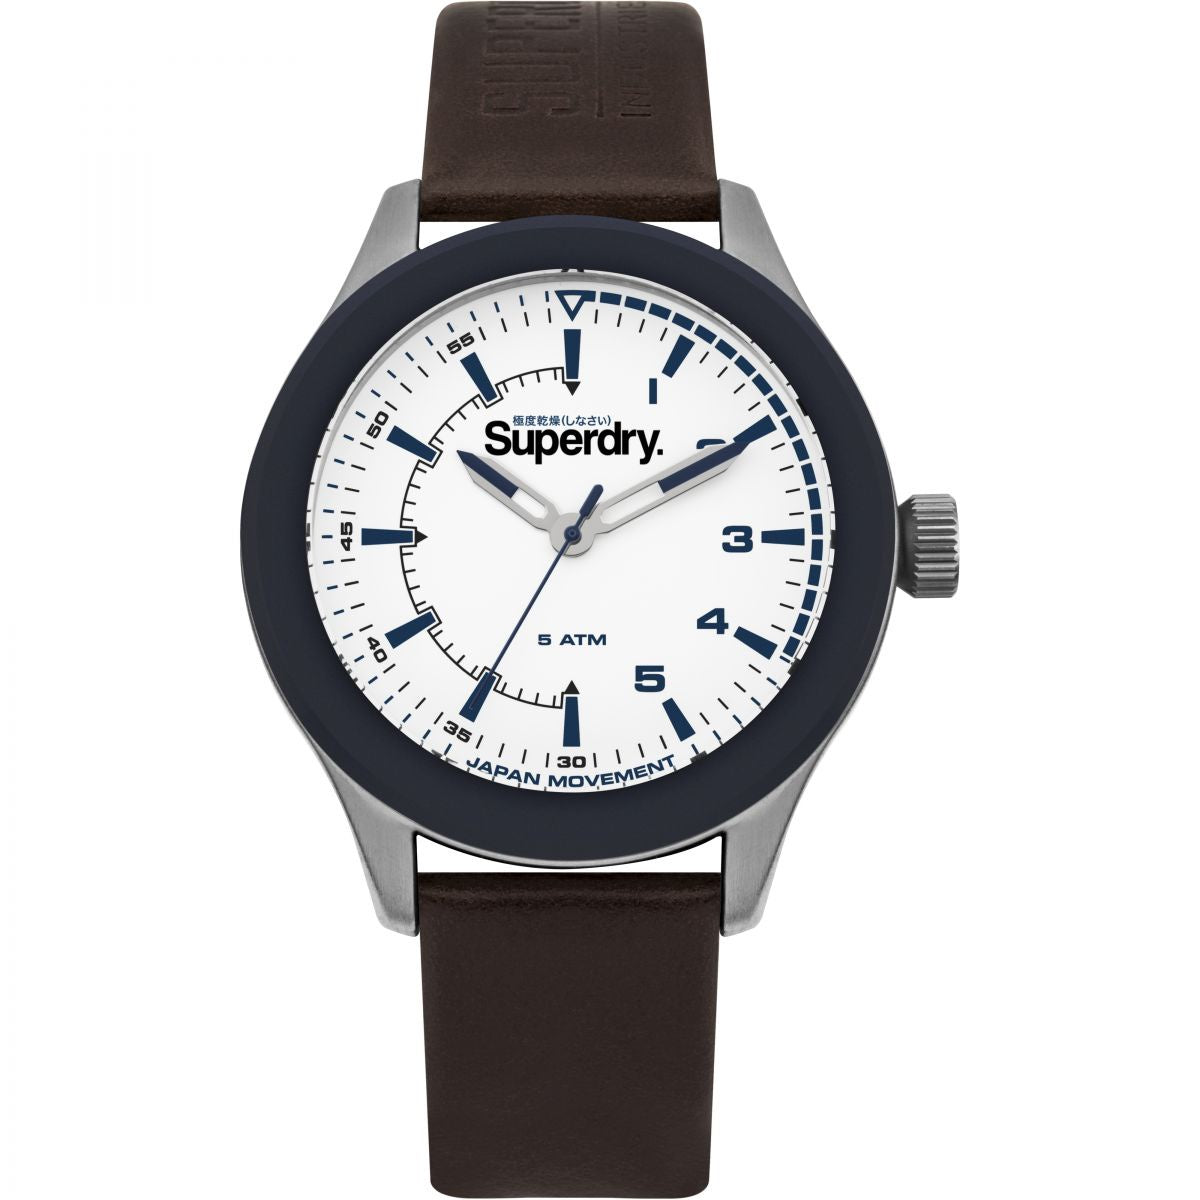 Superdry Rebel Challenger Brown Leather Watch SYG231BR - Robert Openshaw Fine Jewellery